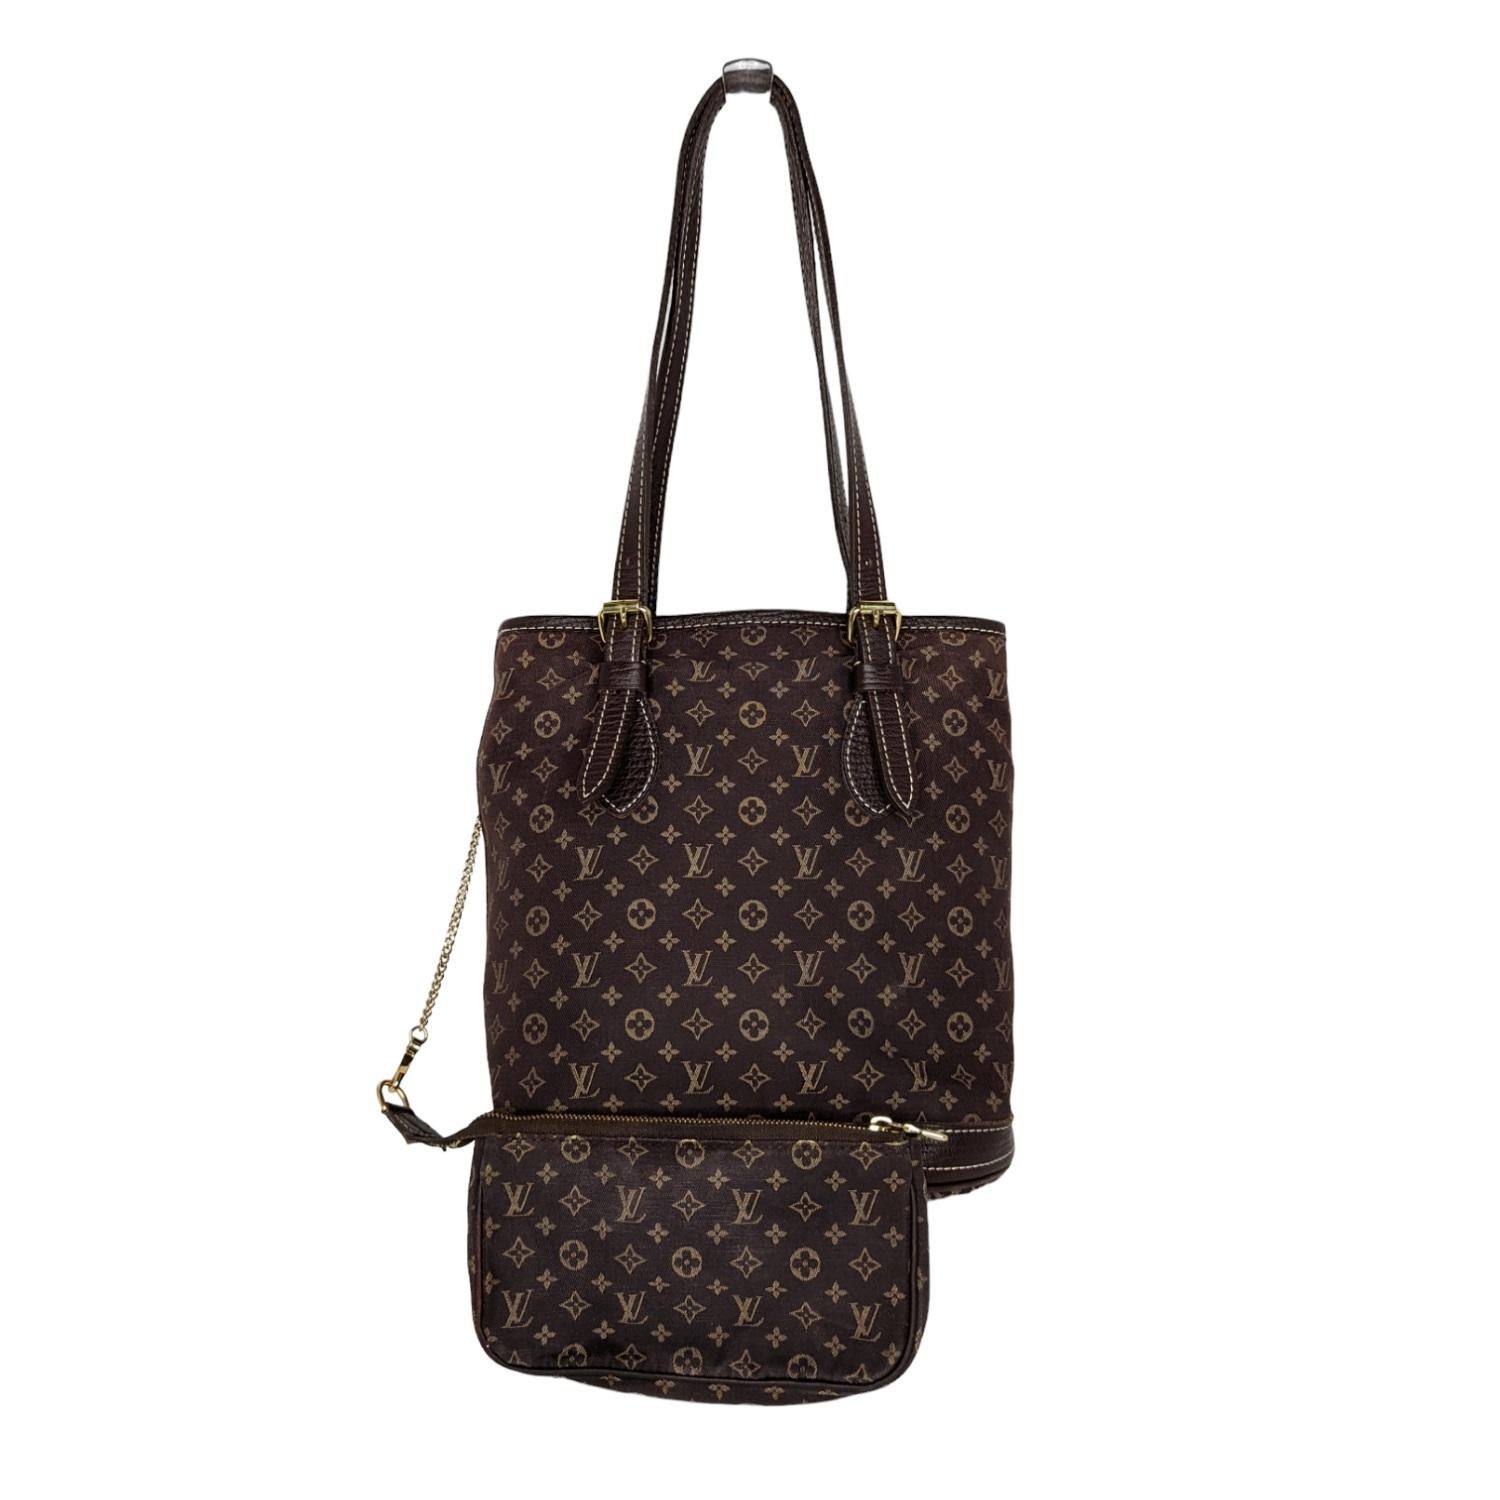 This iconic bucket shaped shoulder bag is finely crafted of the Monogram Mini Lin canvas in brown, which is supple, light and stain resistant. It is 58% cotton, 24% linen, and 18% polyamide. The trim features grained calf leather at the base and